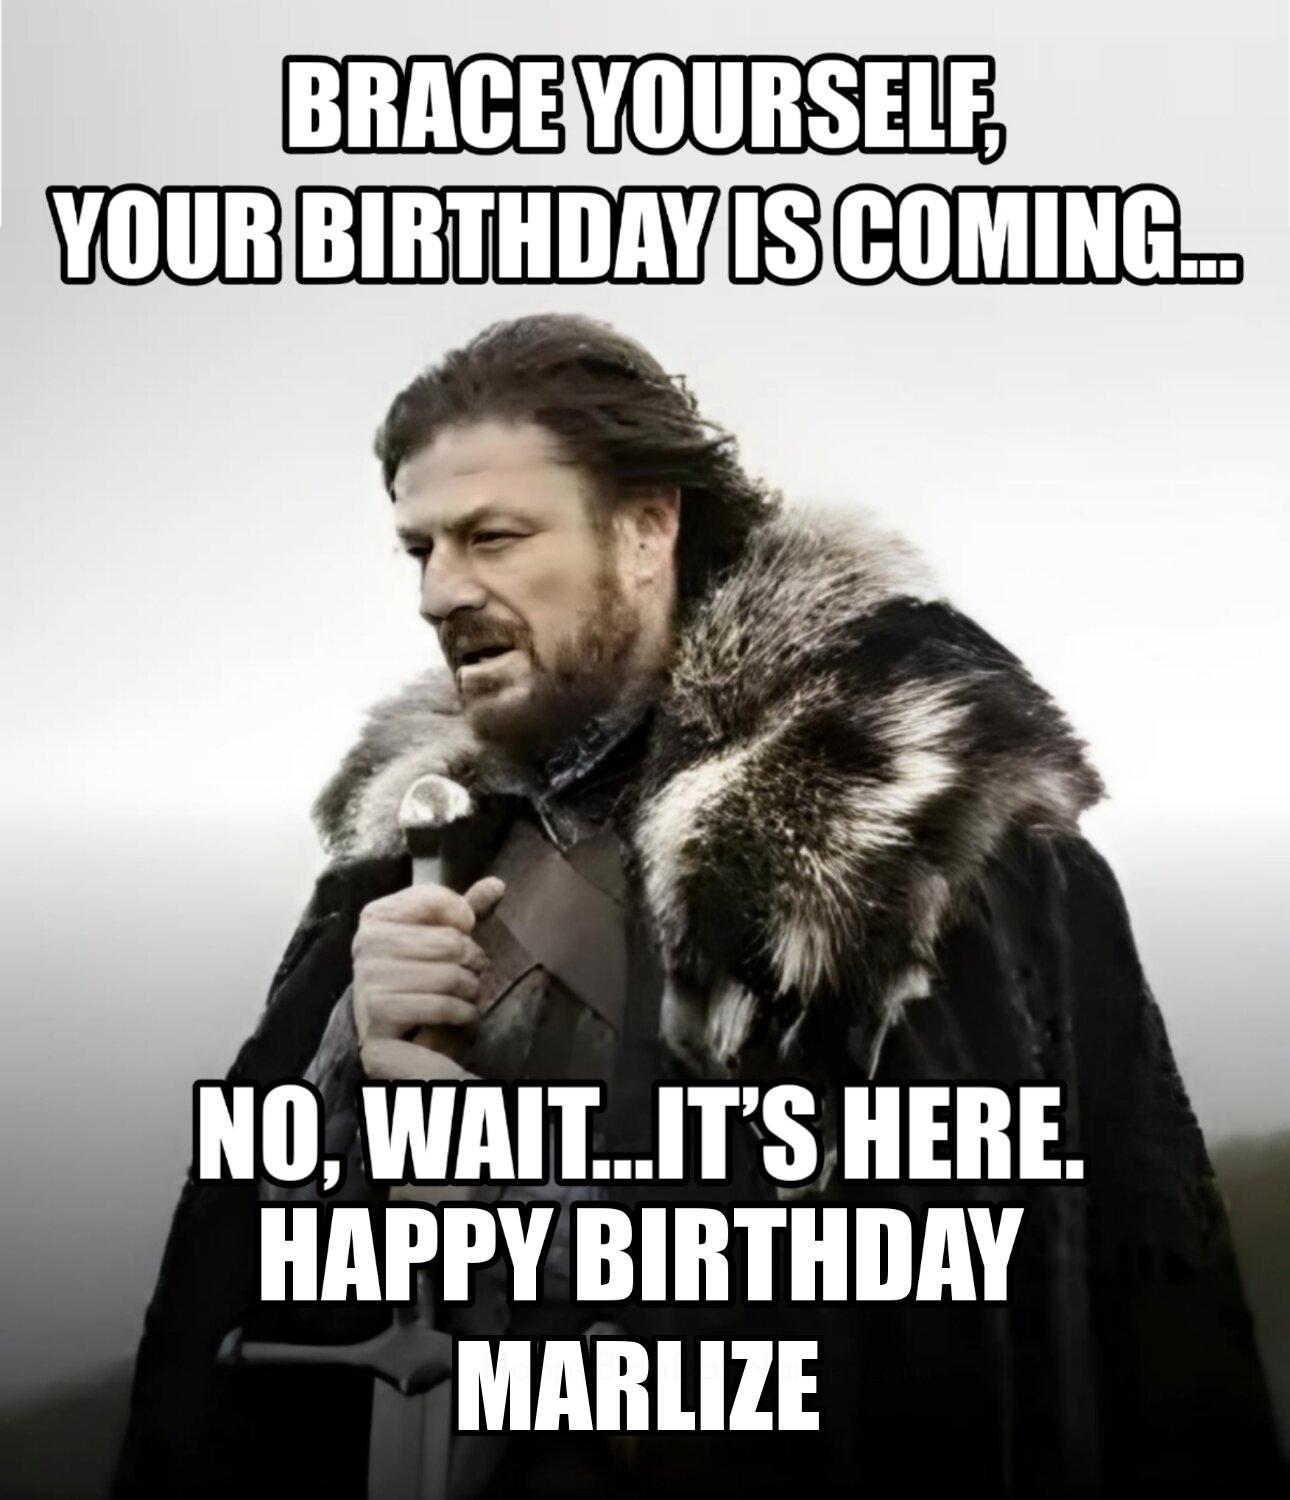 Happy Birthday Marlize Brace Yourself Your Birthday Is Coming Meme